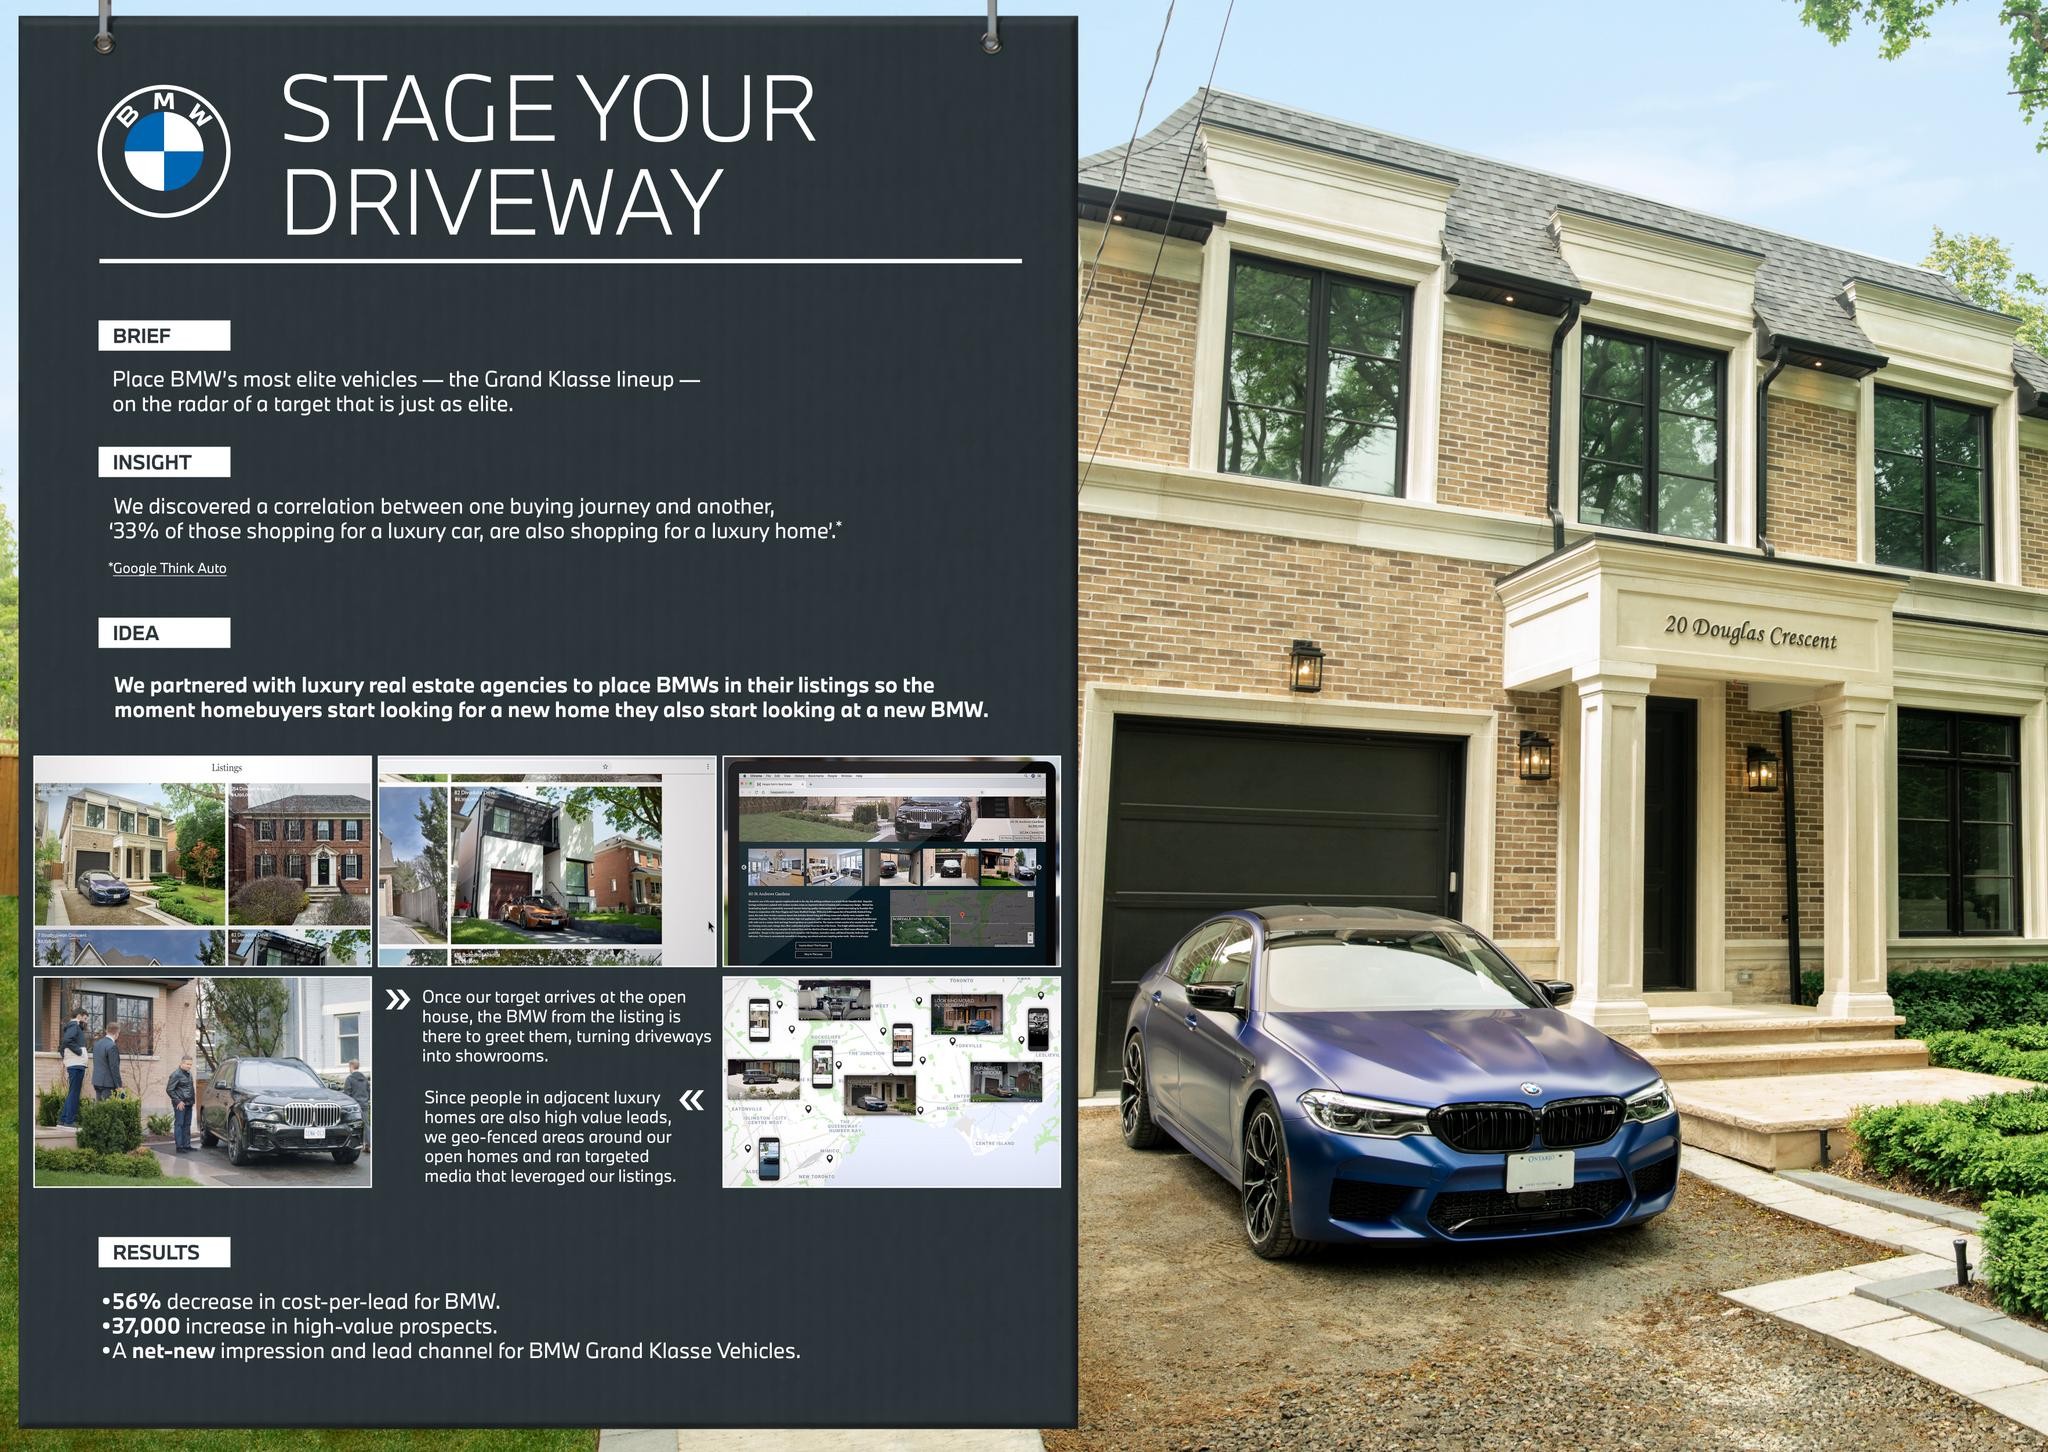 STAGE YOUR DRIVEWAY